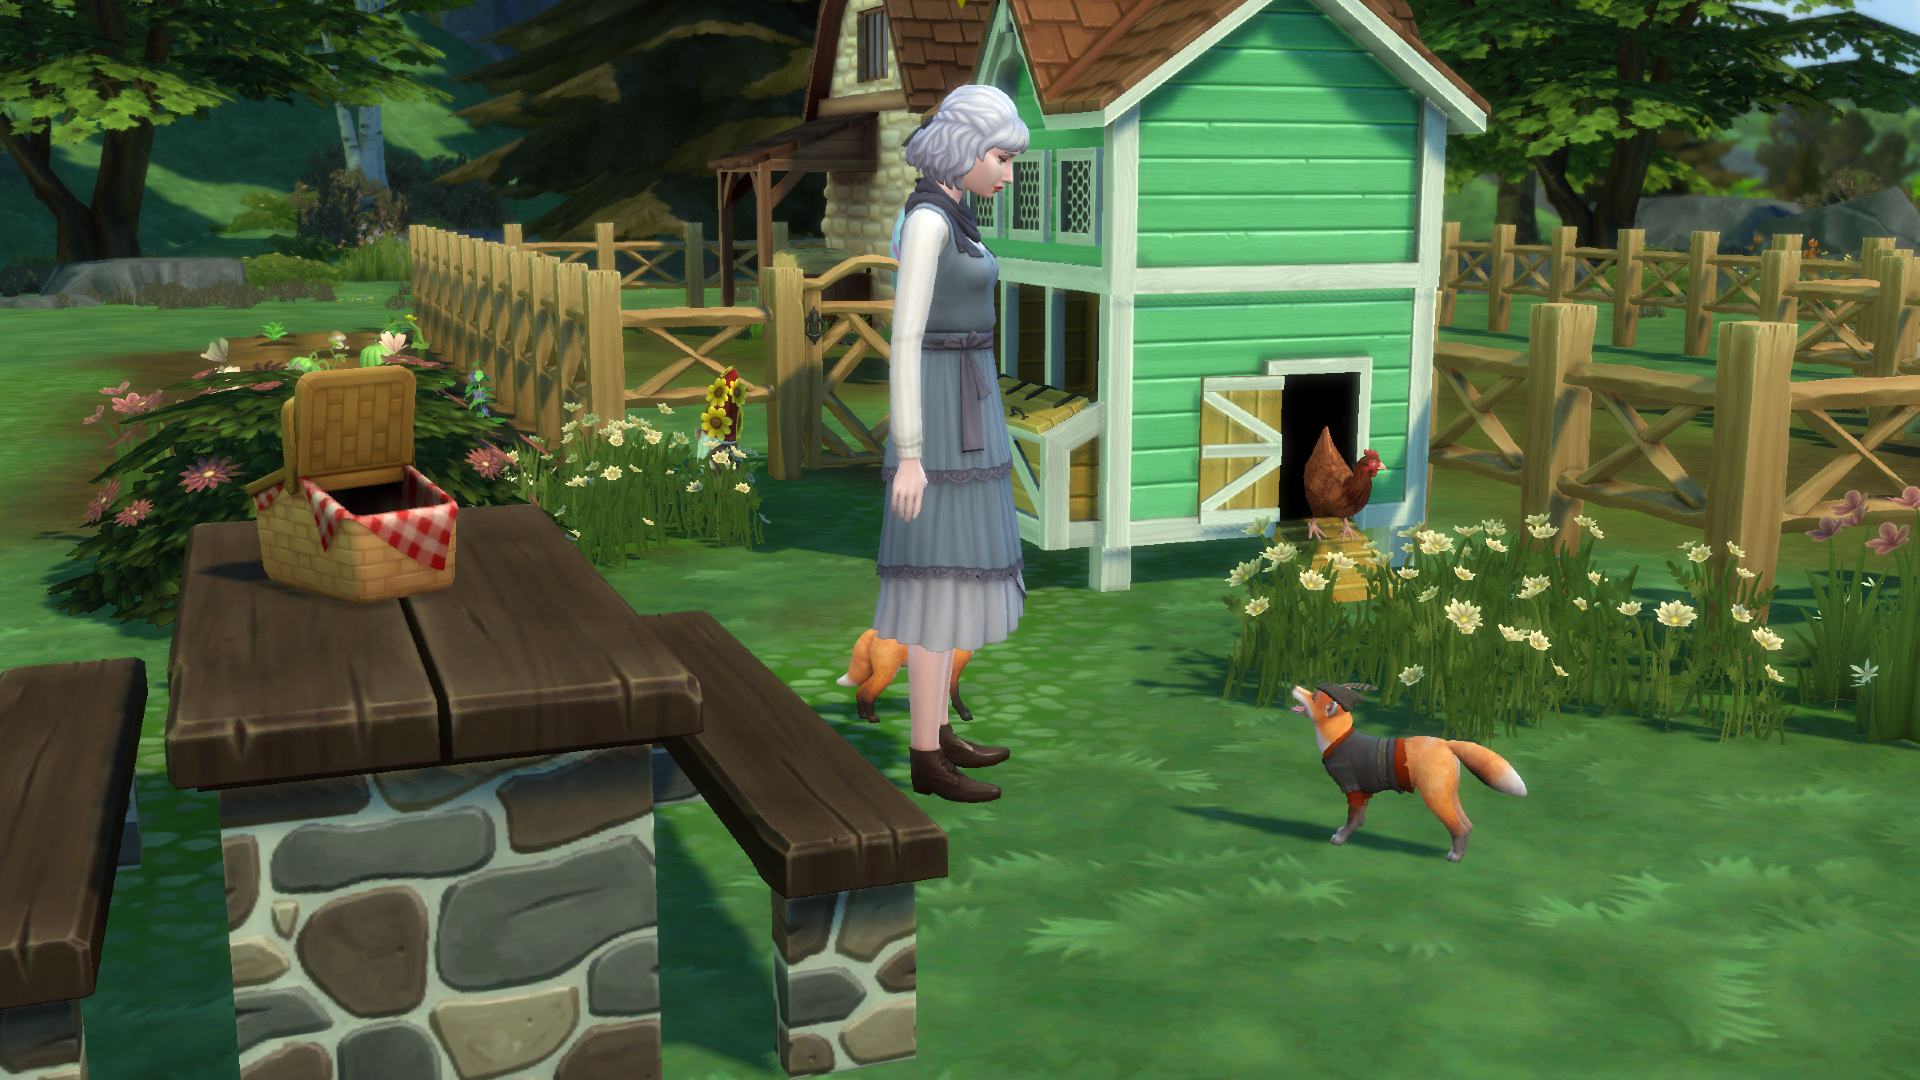 How to buy animal clothes in Sims 4 Cottage Living | GamesRadar+